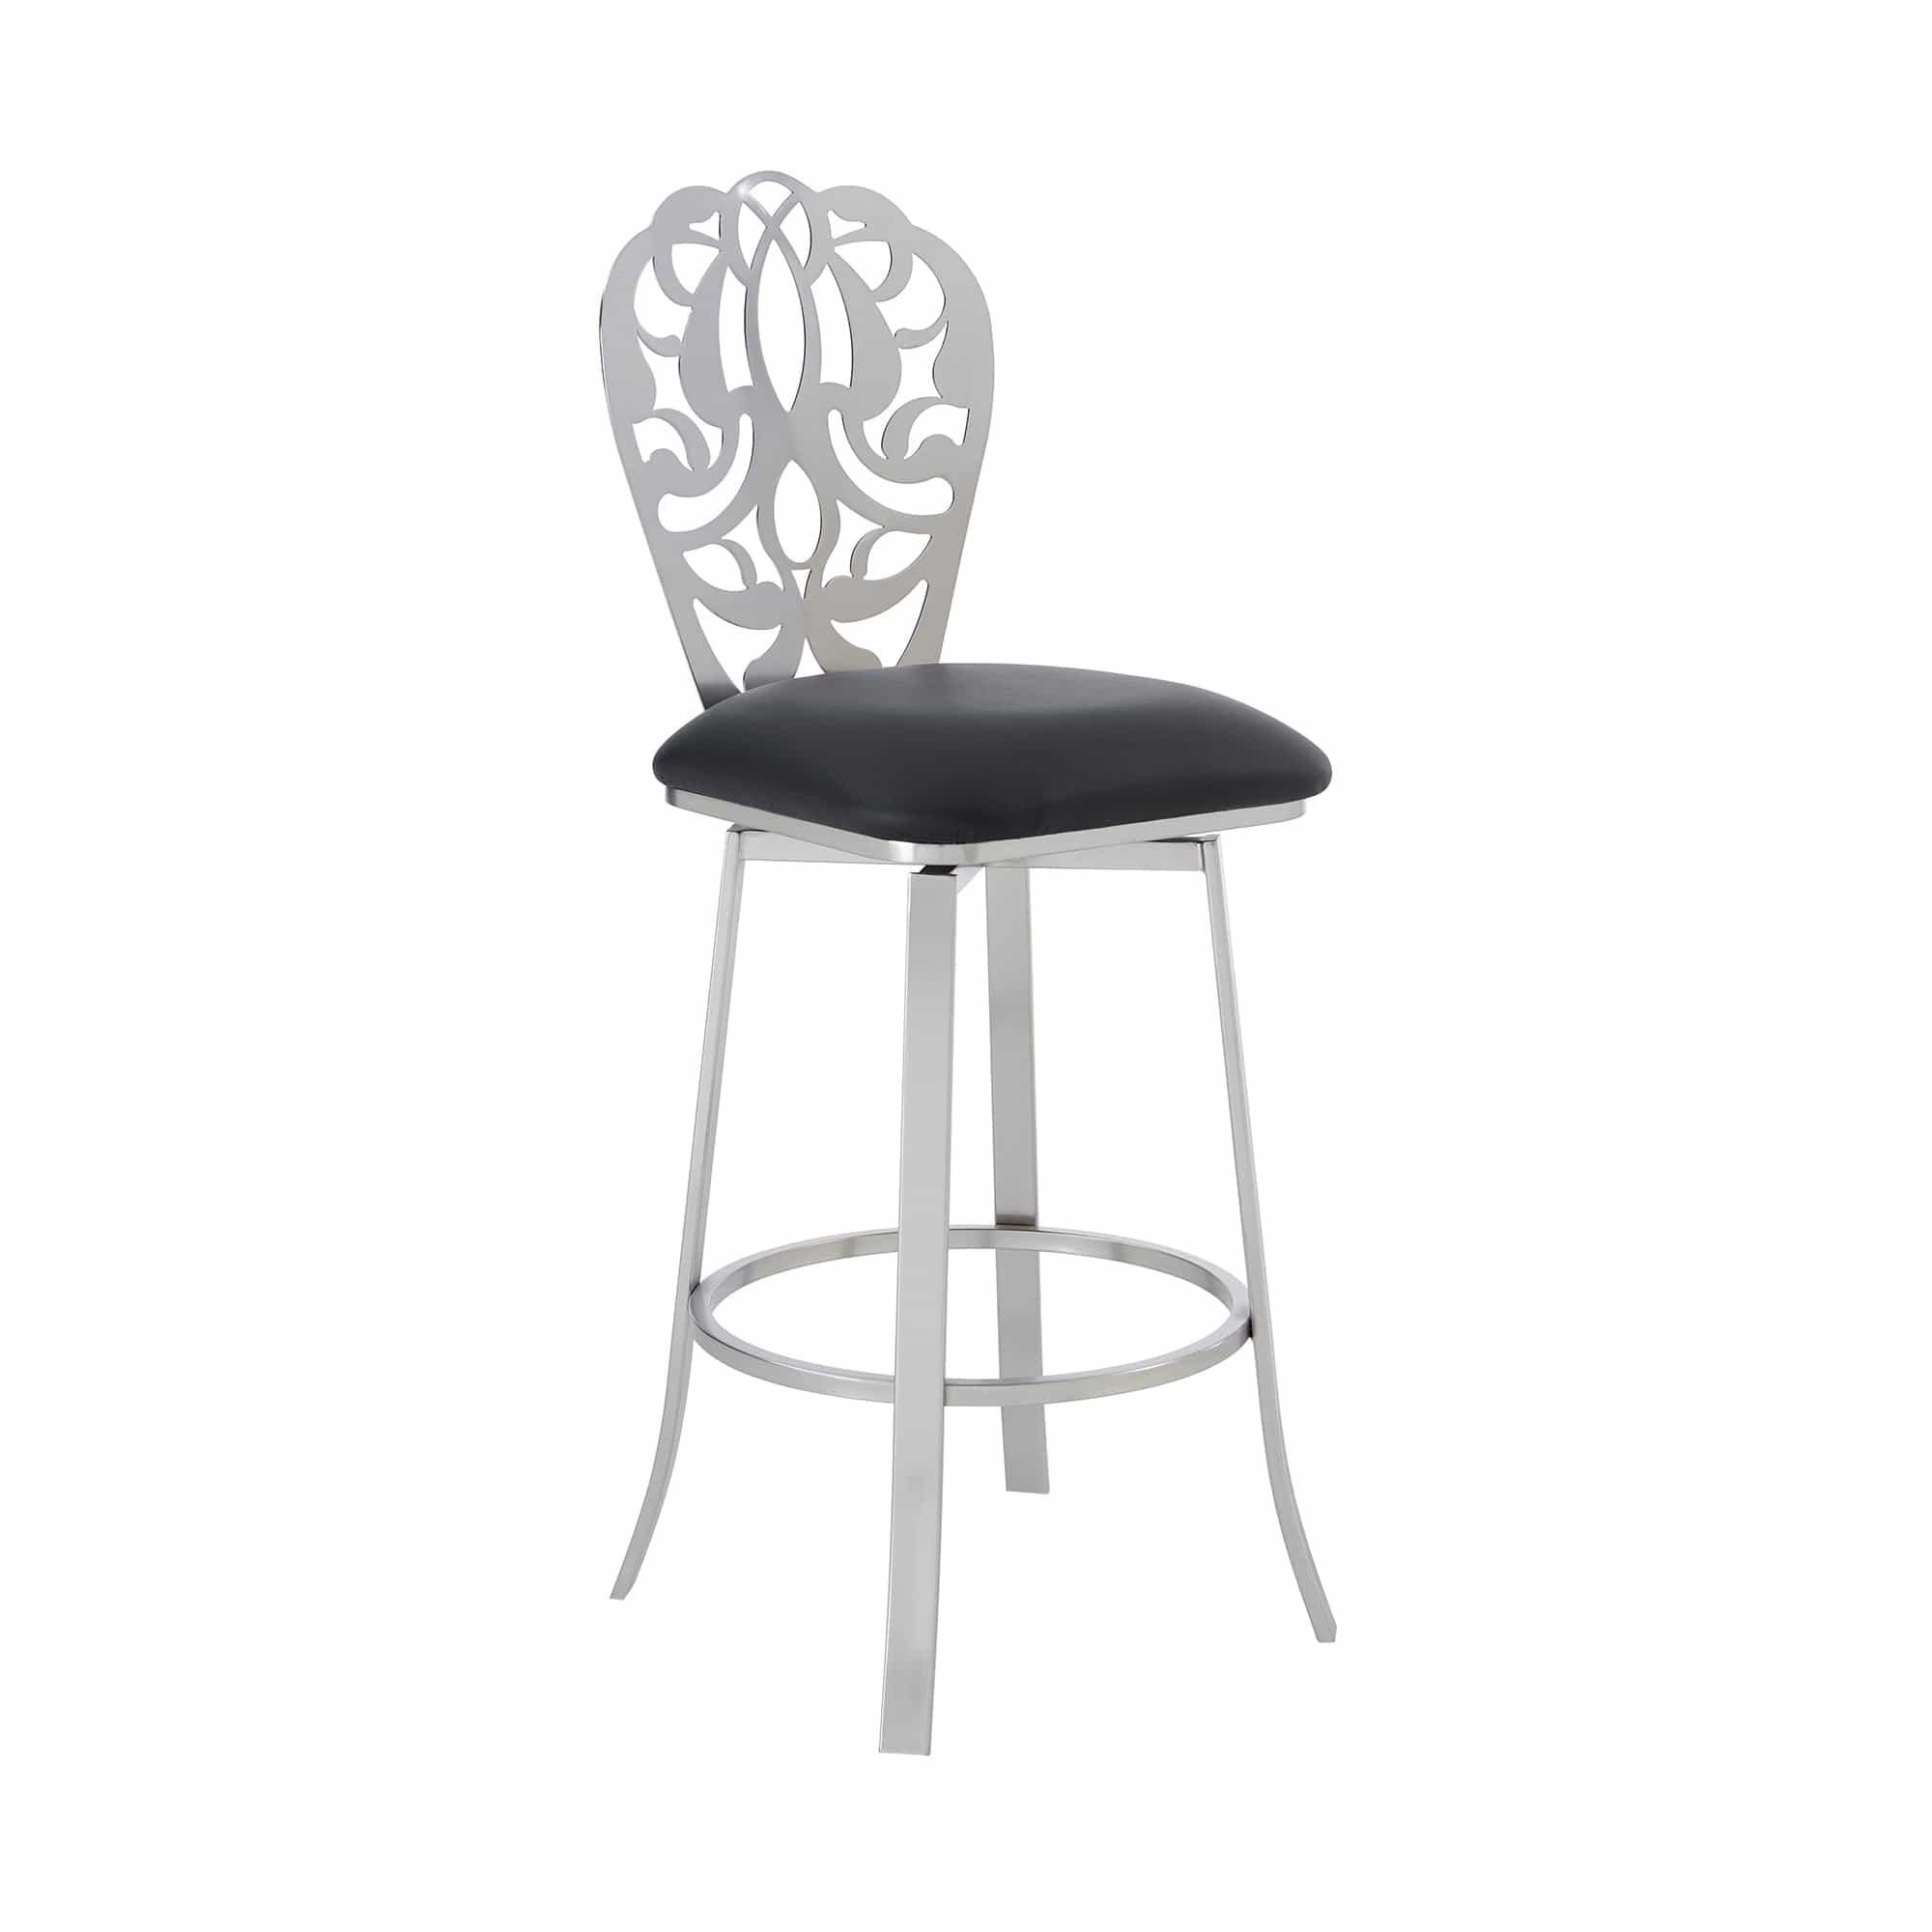 Armen Living Barstool Armen Living | Cherie Contemporary 30" Bar Height Barstool in Brushed Stainless Steel Finish and Black Faux Leather | LCCHBABSBL30